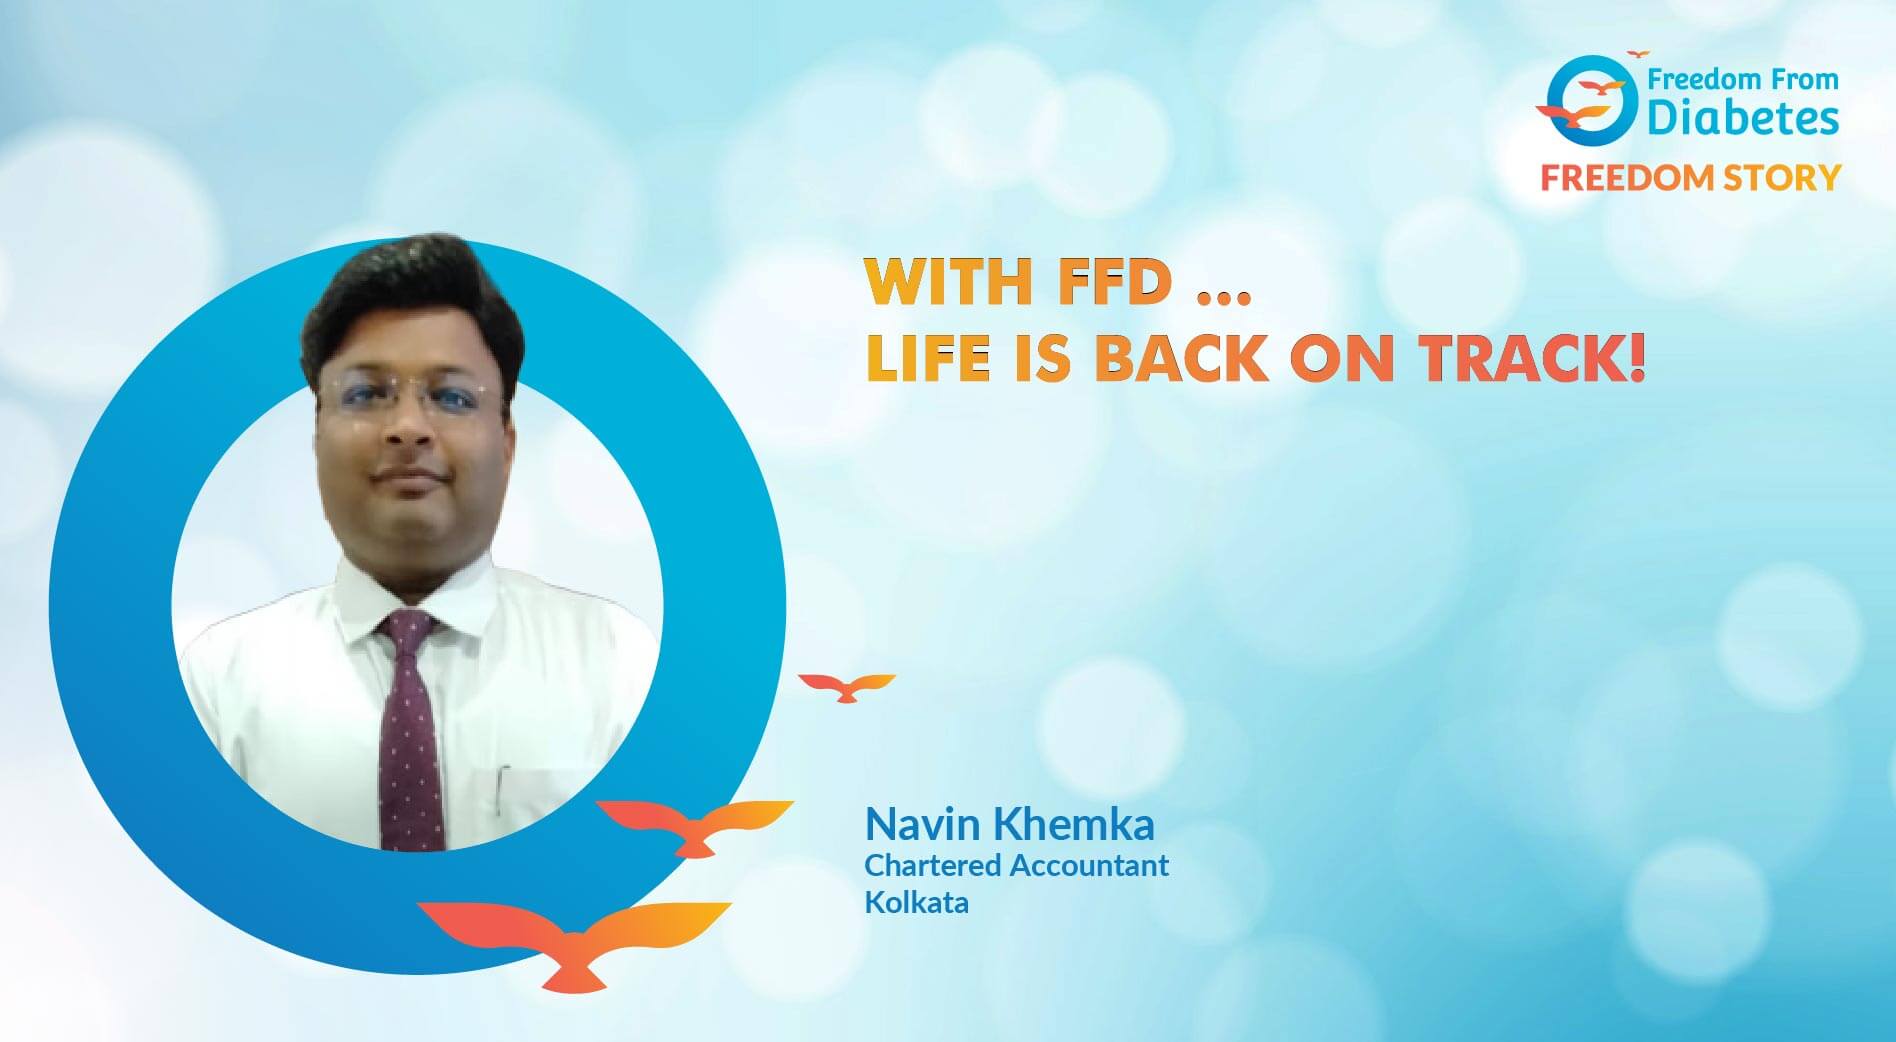 With FFD ... Life is back on track!